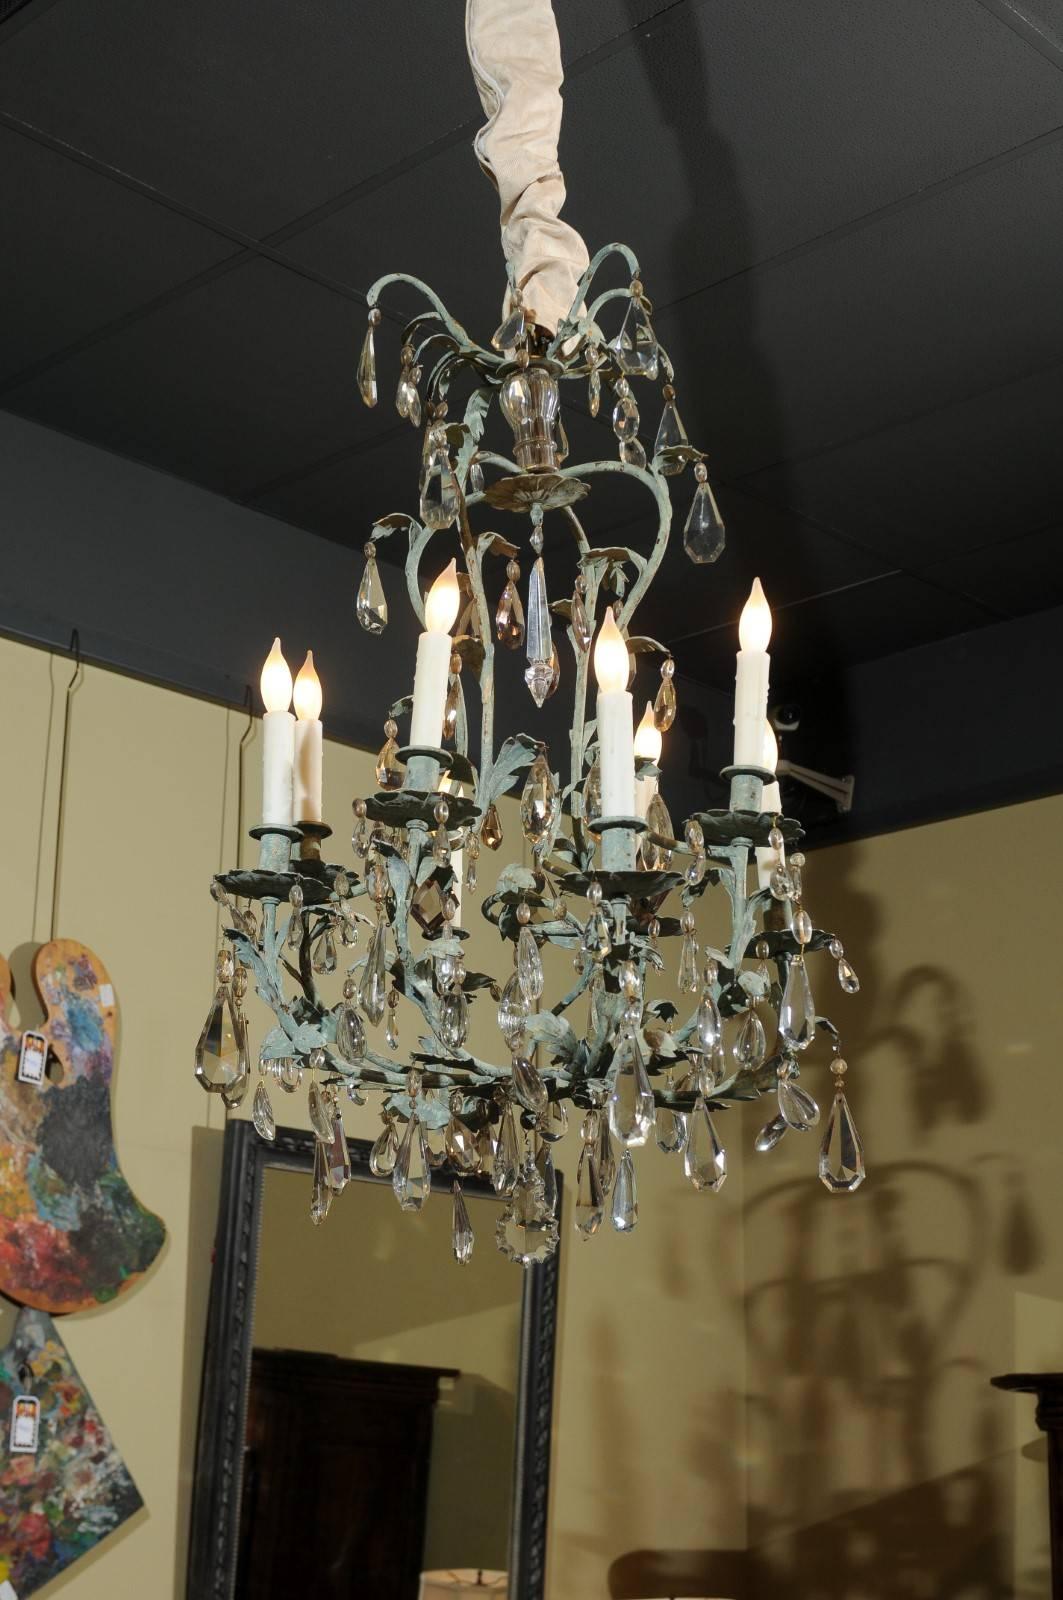 Early 20th century French iron and crystal chandelier, circa 1900
Both the tone of green and the wonderful shape on this chandelier gives this piece a light, fun feeling. The cage is basically a pear shape but with wonderful leaves intertwined on